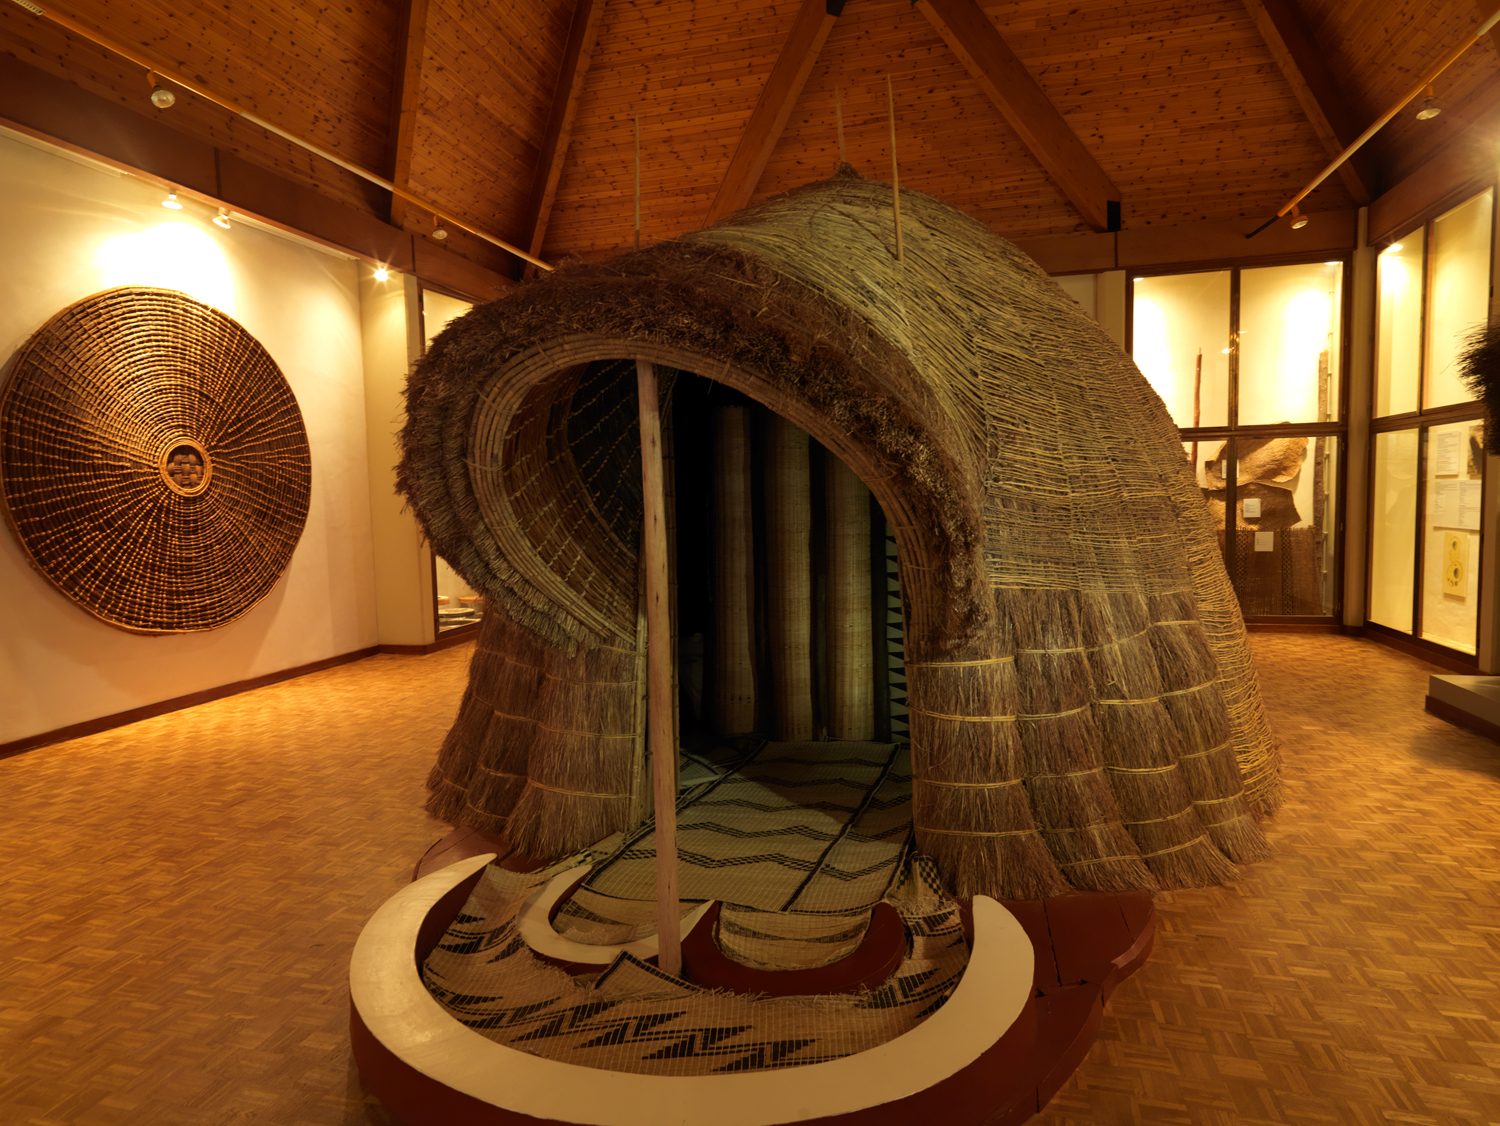 All about Ethnographic Museum in Rwanda